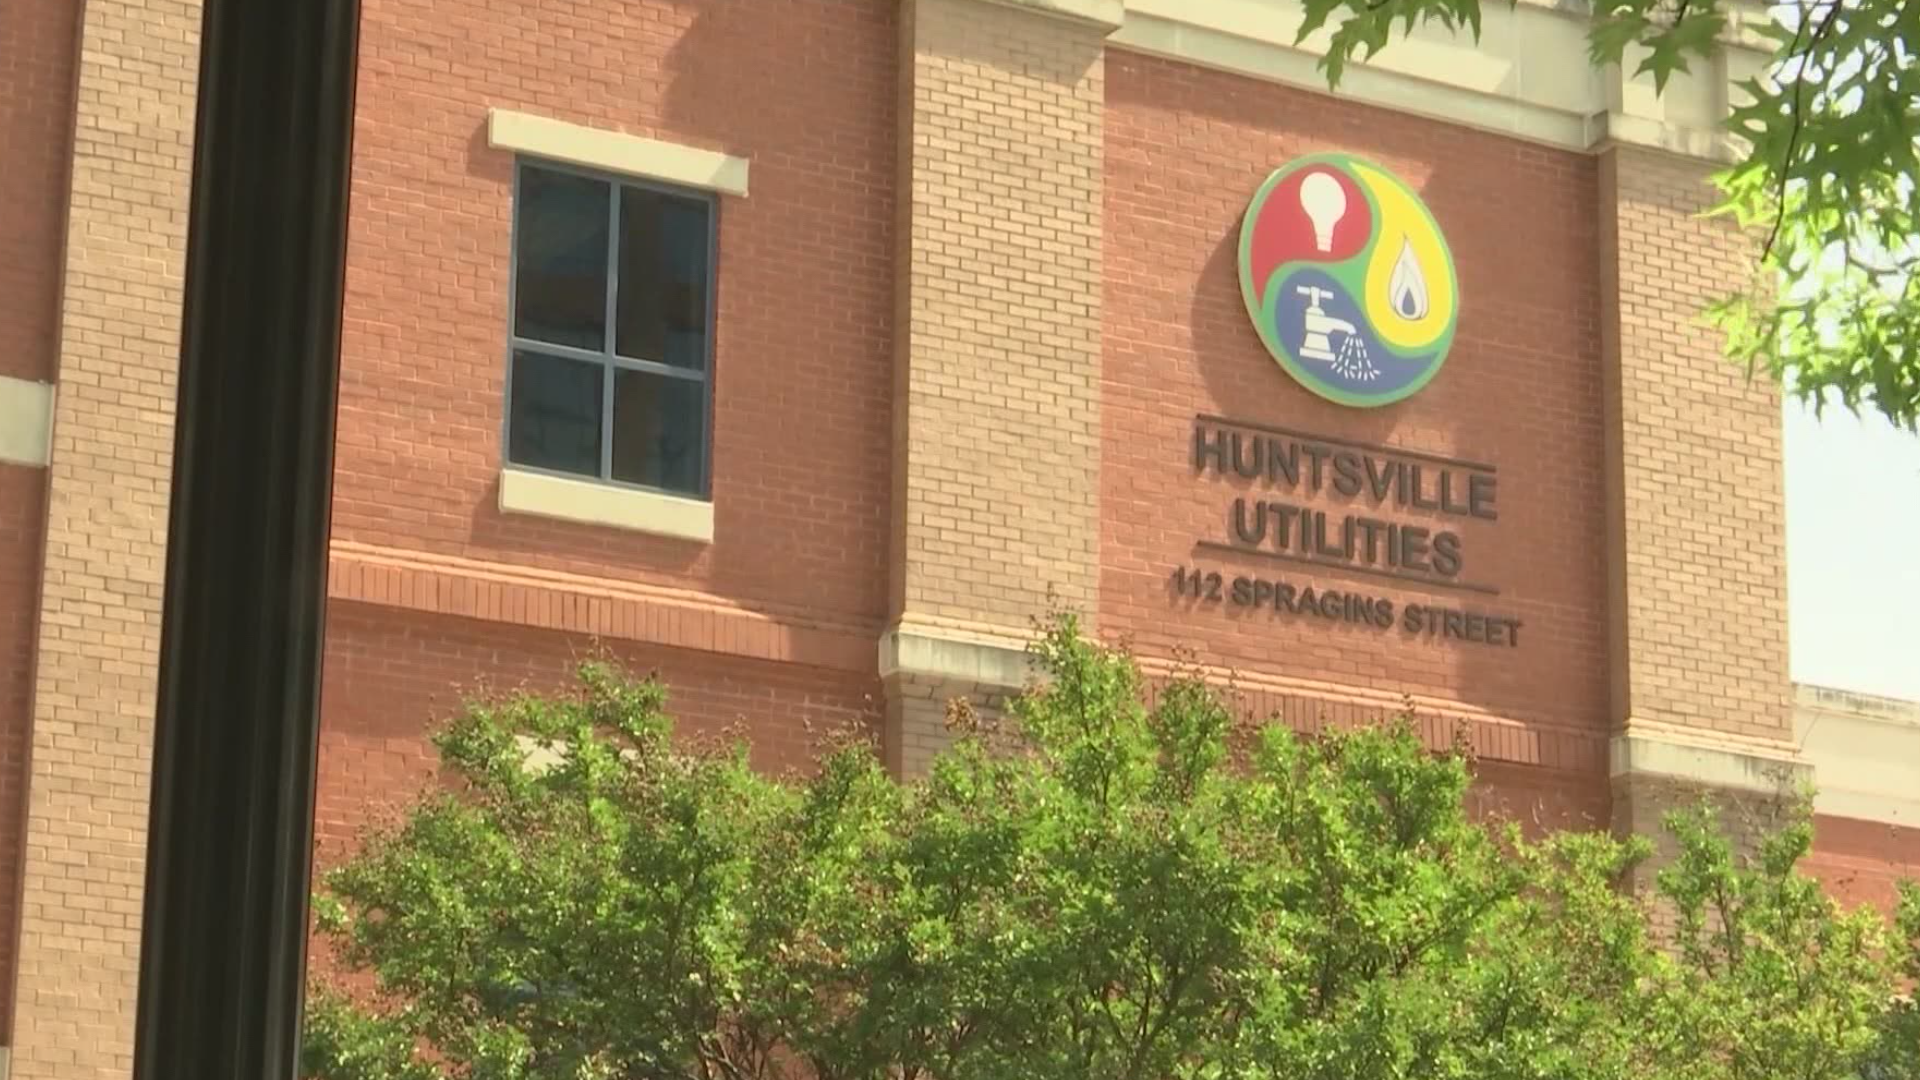 If you're struggling to pay your utility bill, let Huntsville Utilities know immediately to help set up an installment plan.